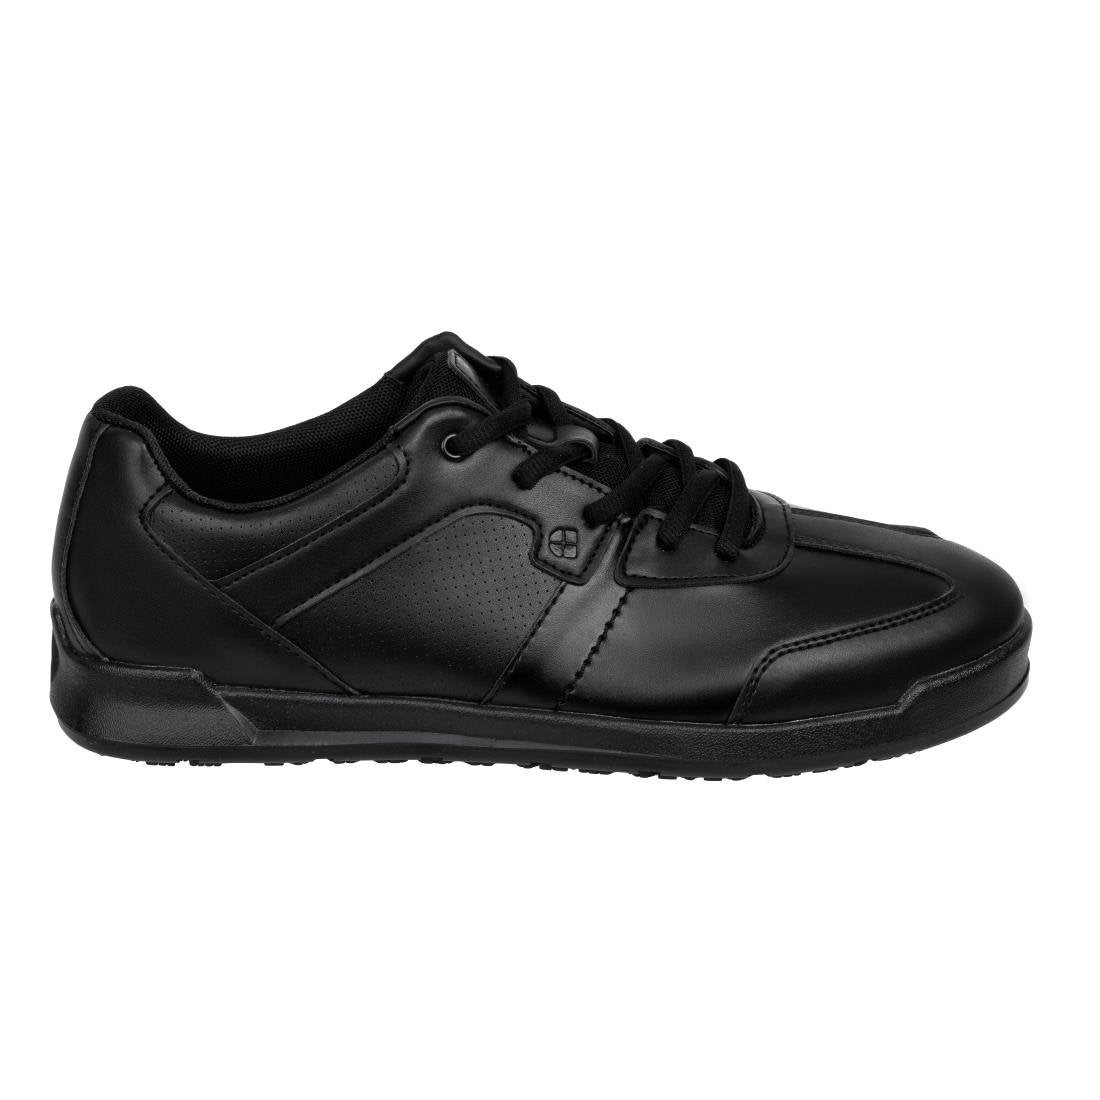 BB585-44 Shoes for Crews Freestyle Trainers Black Size 44